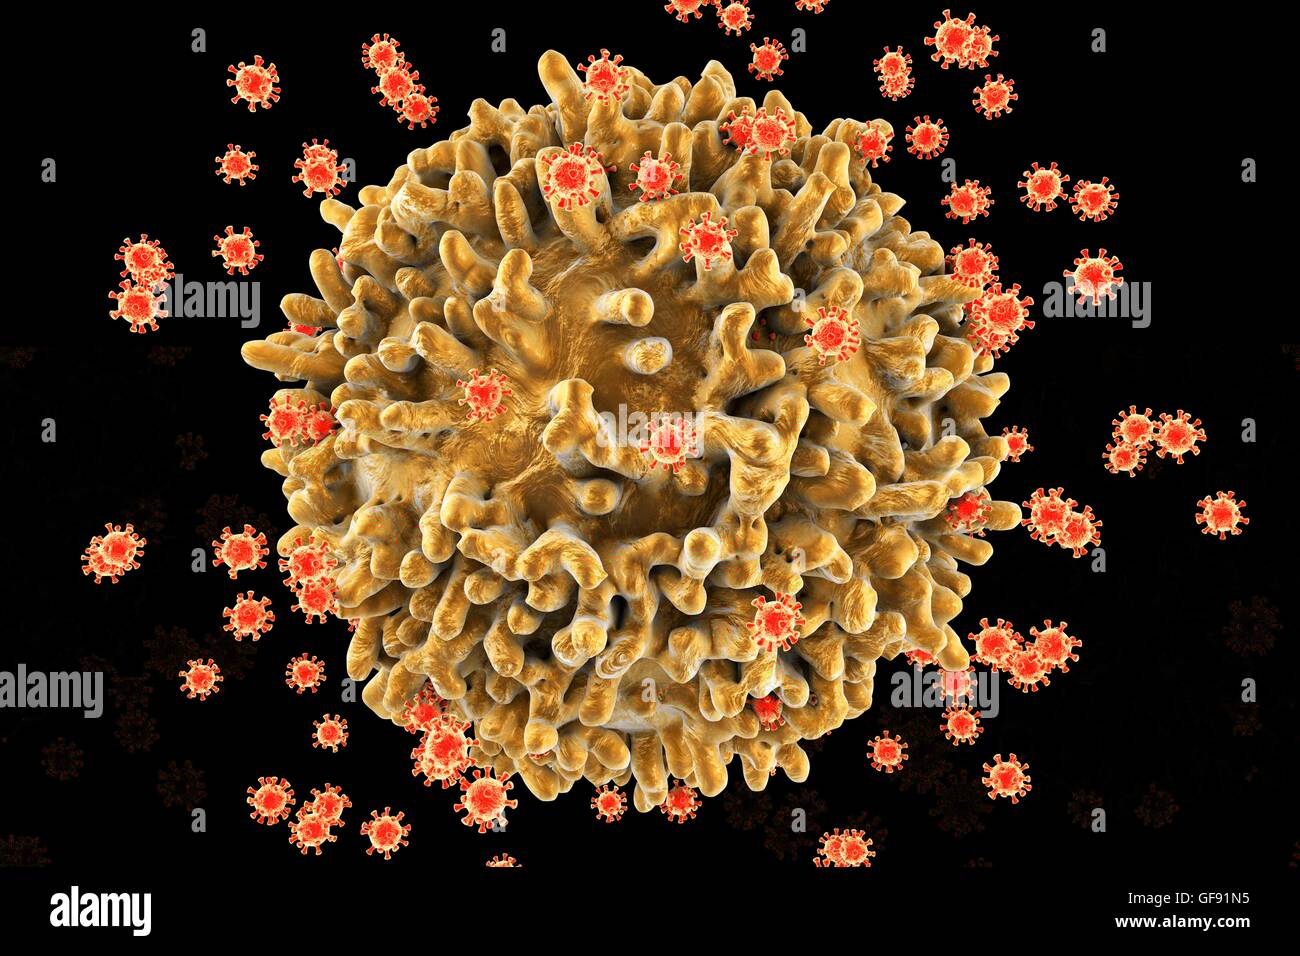 HIV viruses infecting T-lymphocytes, computer illustration. The surface of the T-cell has a lumpy appearance with large irregular surface protrusions. Smaller spherical structures on the cell surface are HIV virus particles budding away from the cell memb Stock Photo